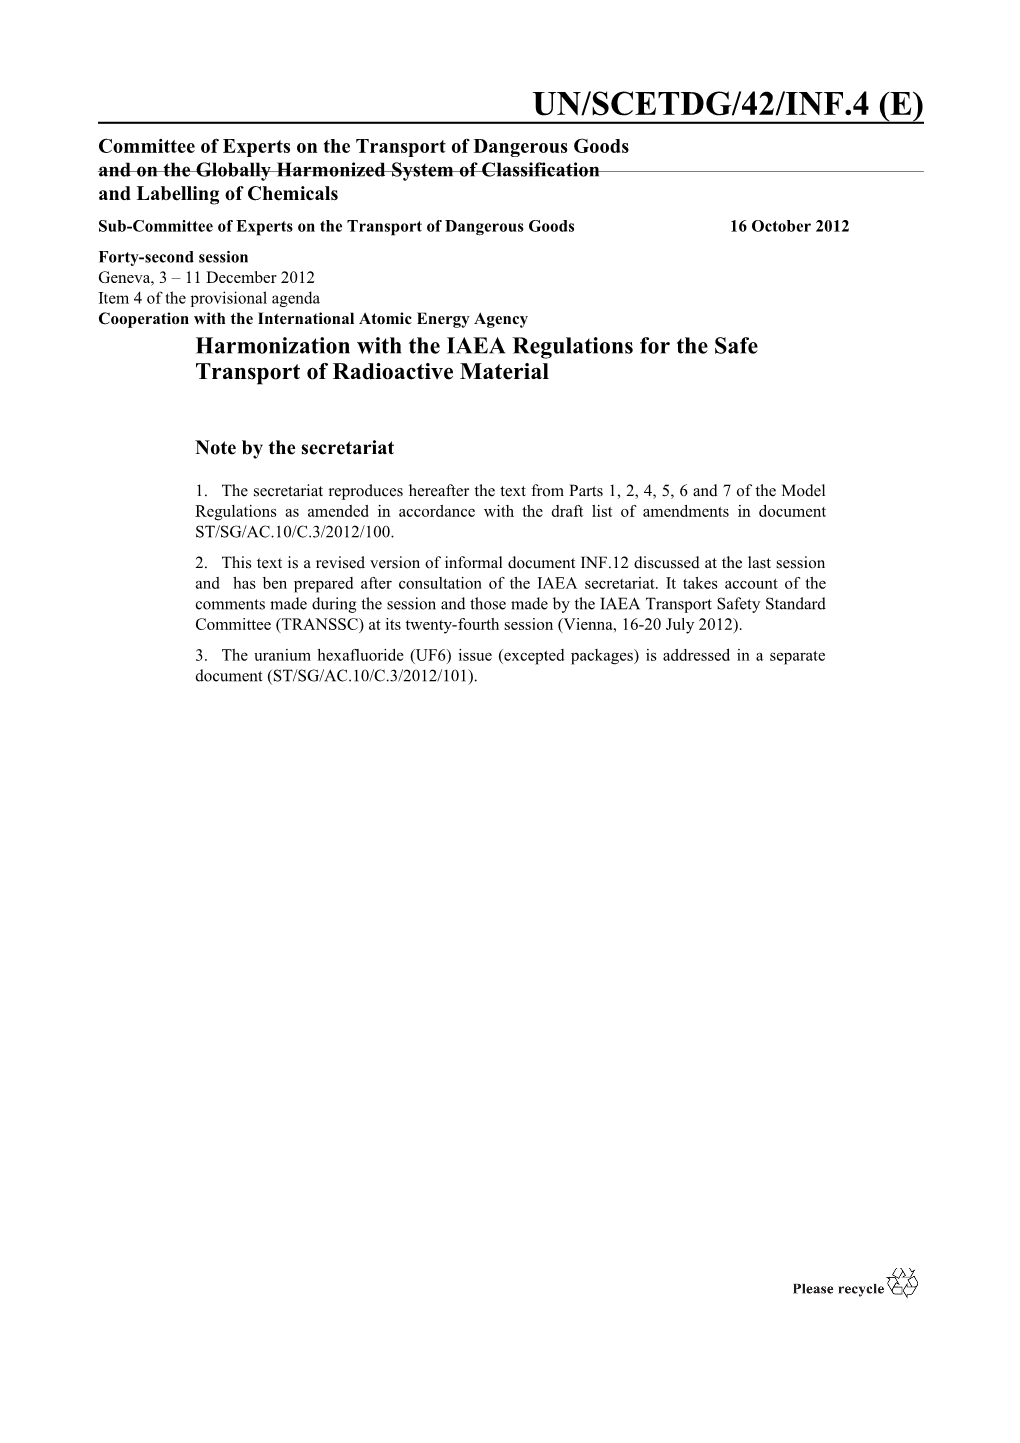 Harmonization with the IAEA Regulations for the Safe Transport of Radioactive Material